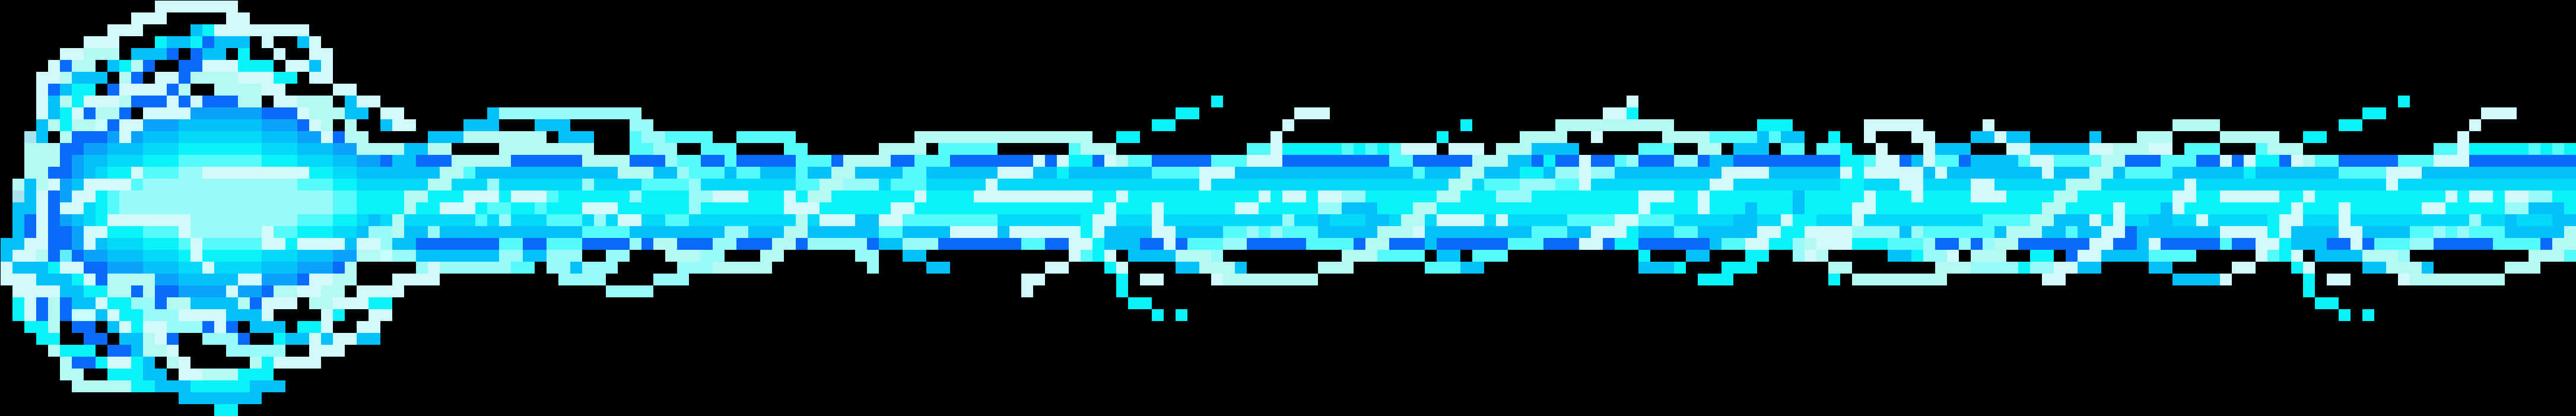 Pixelated Blue Laser Beam PNG